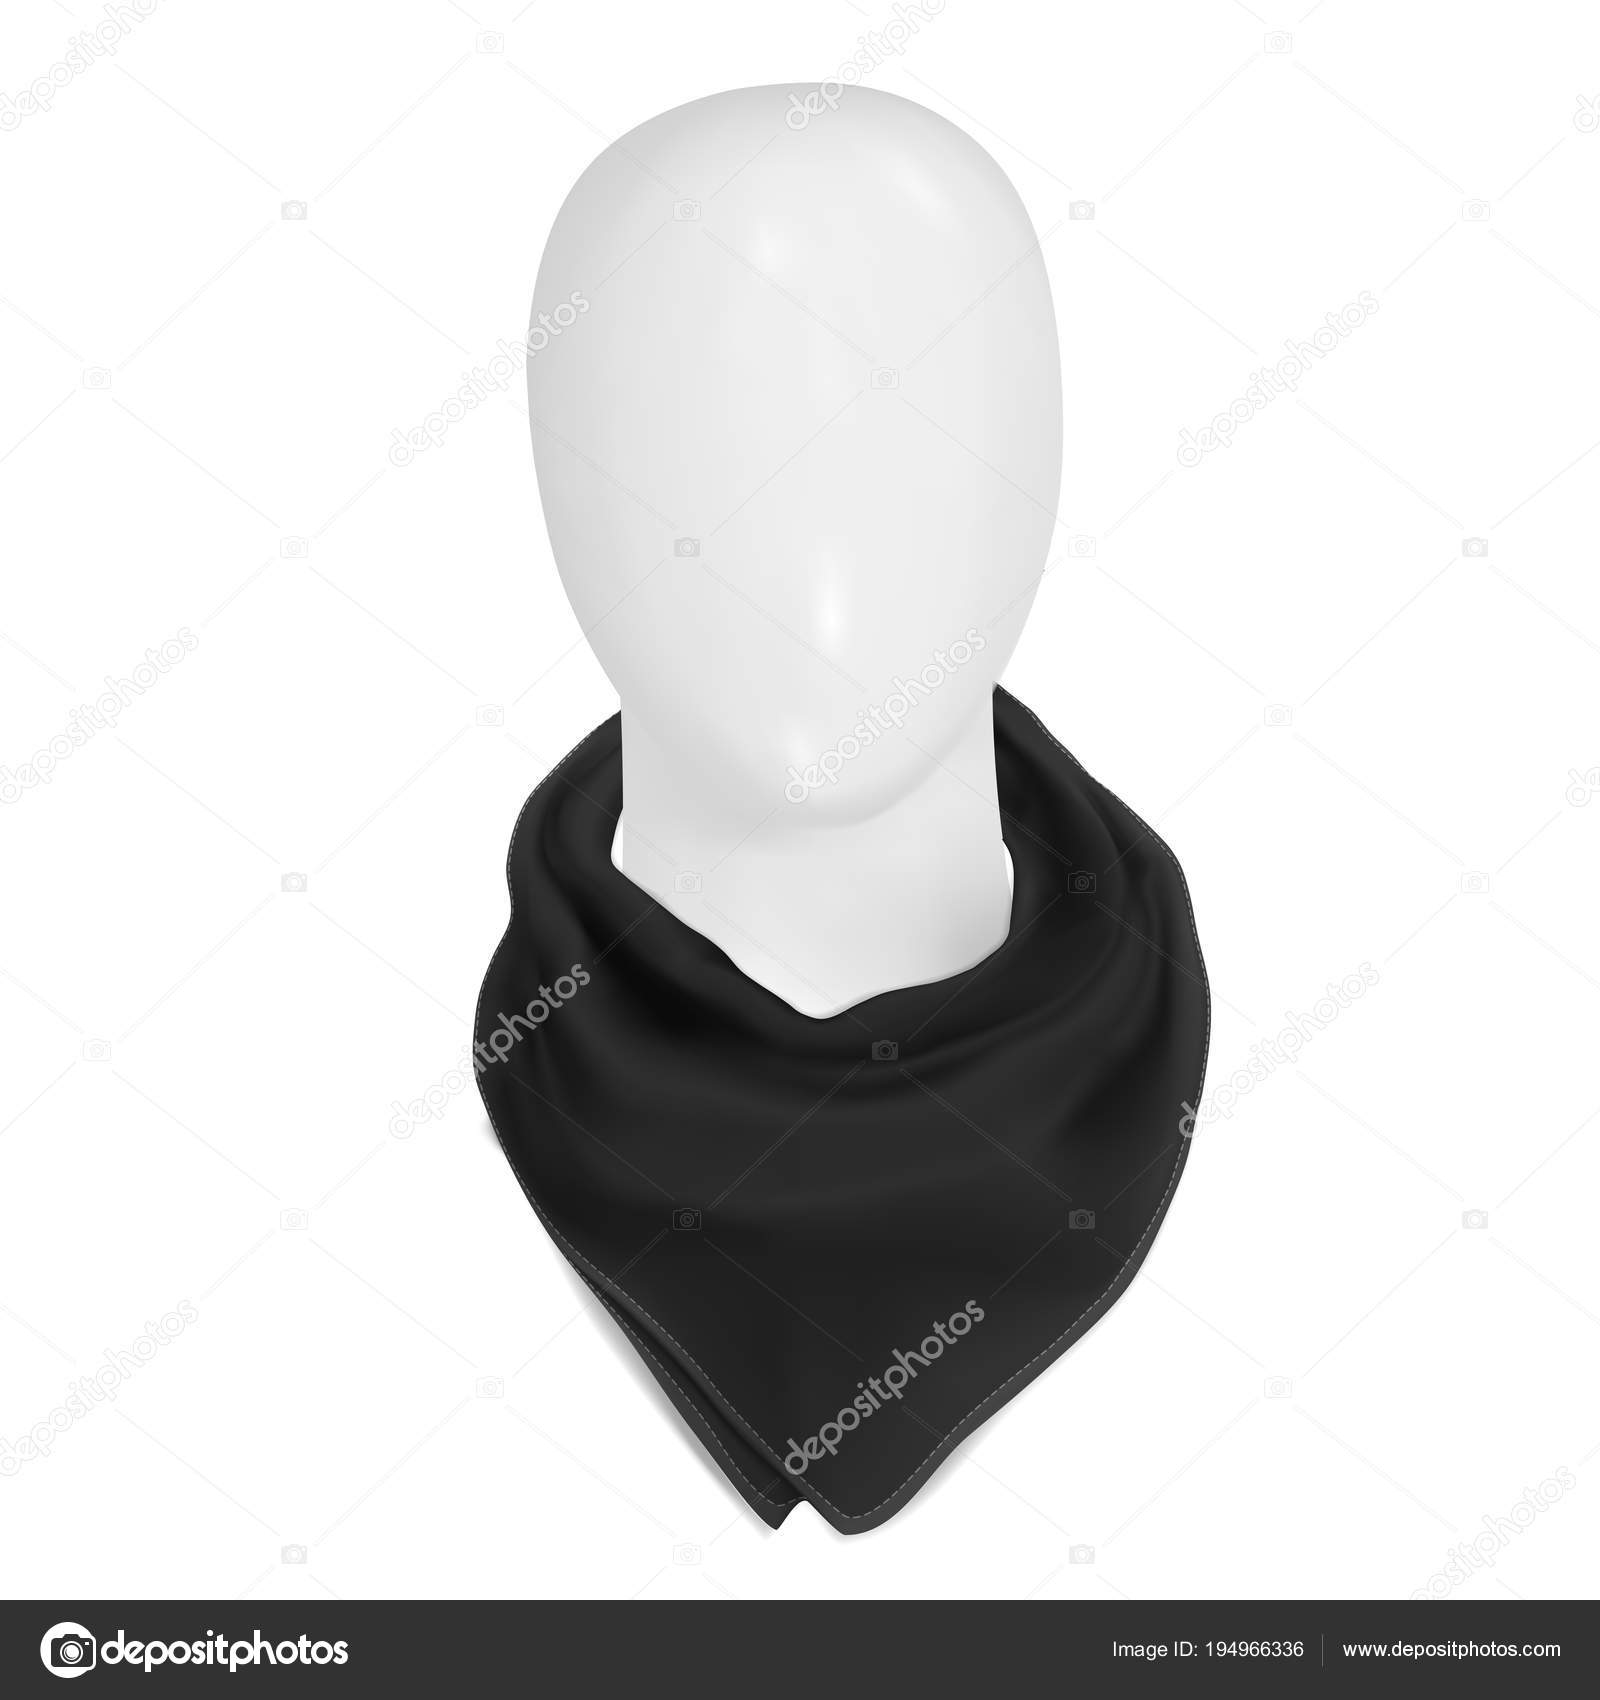 Download Vector Mock Up Black Bandana On The Neck On A White Mannequin Head Stock Vector Image By C Urfingus 194966336